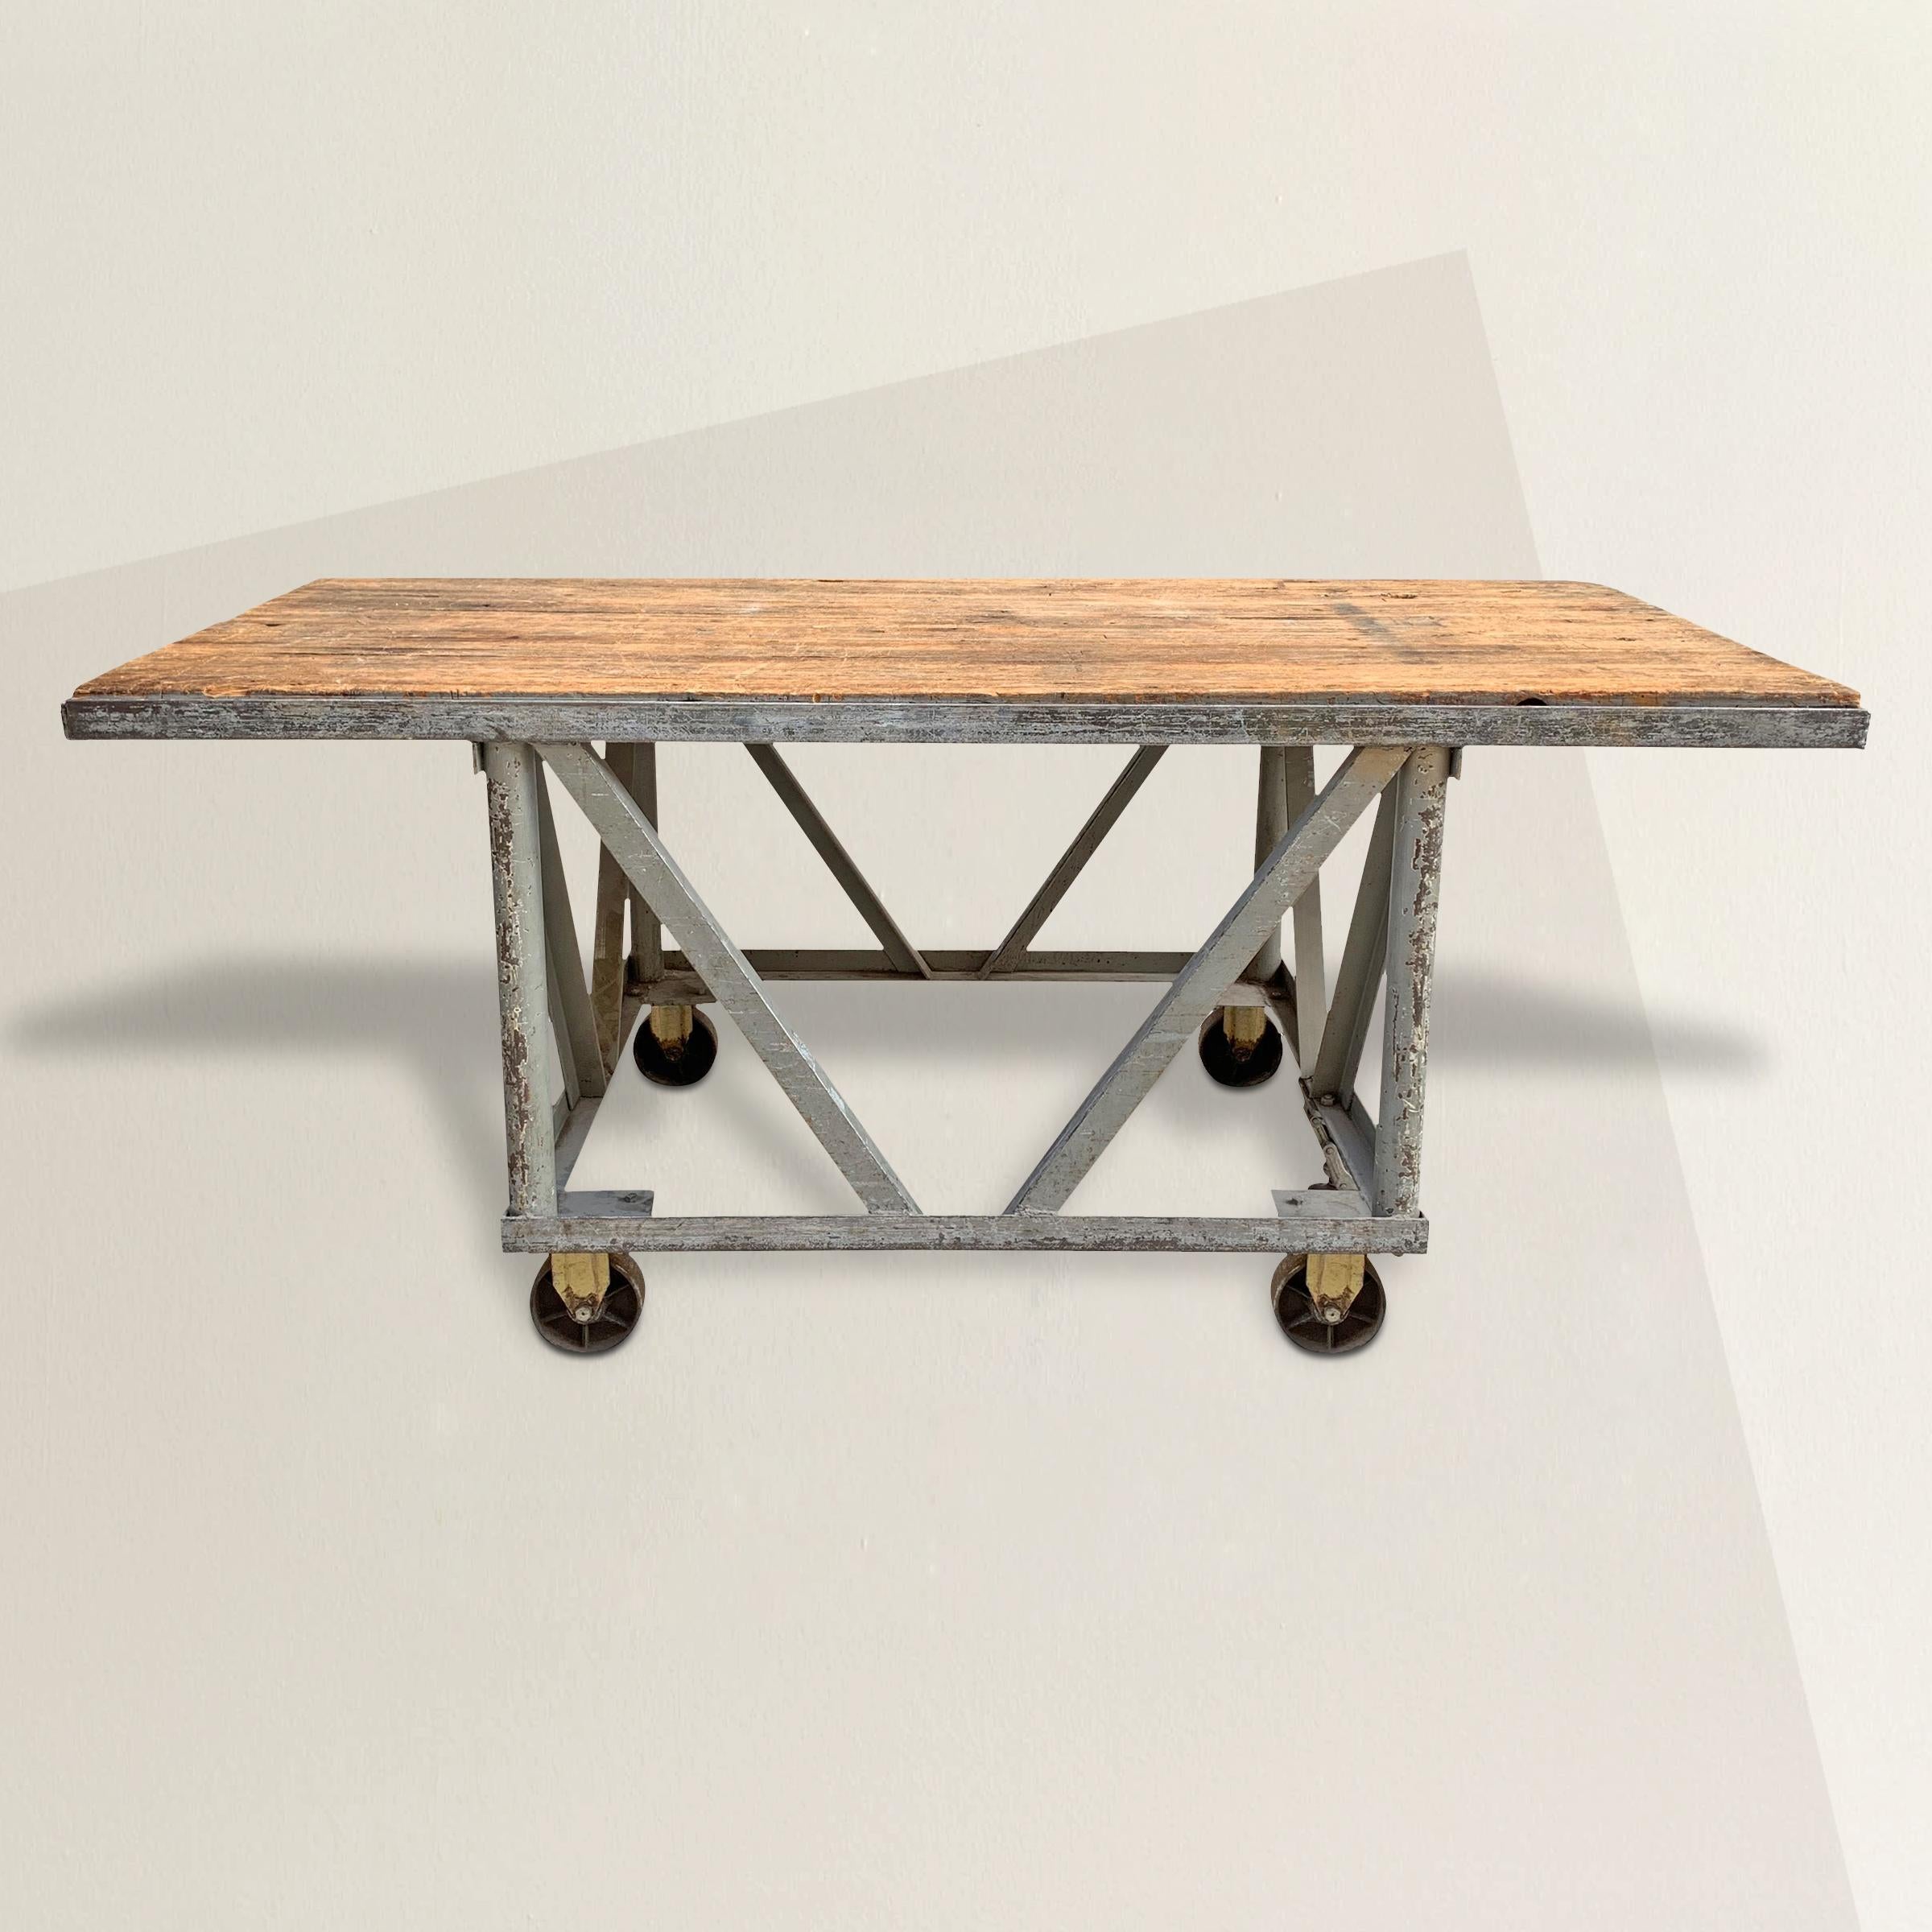 An incredible early 20th century American industrial steel table with a plank wood top with a well-worn surface. A locking mechanism on one side can be engaged to keep the table stationary, or disengaged so it can moved around. This would be the